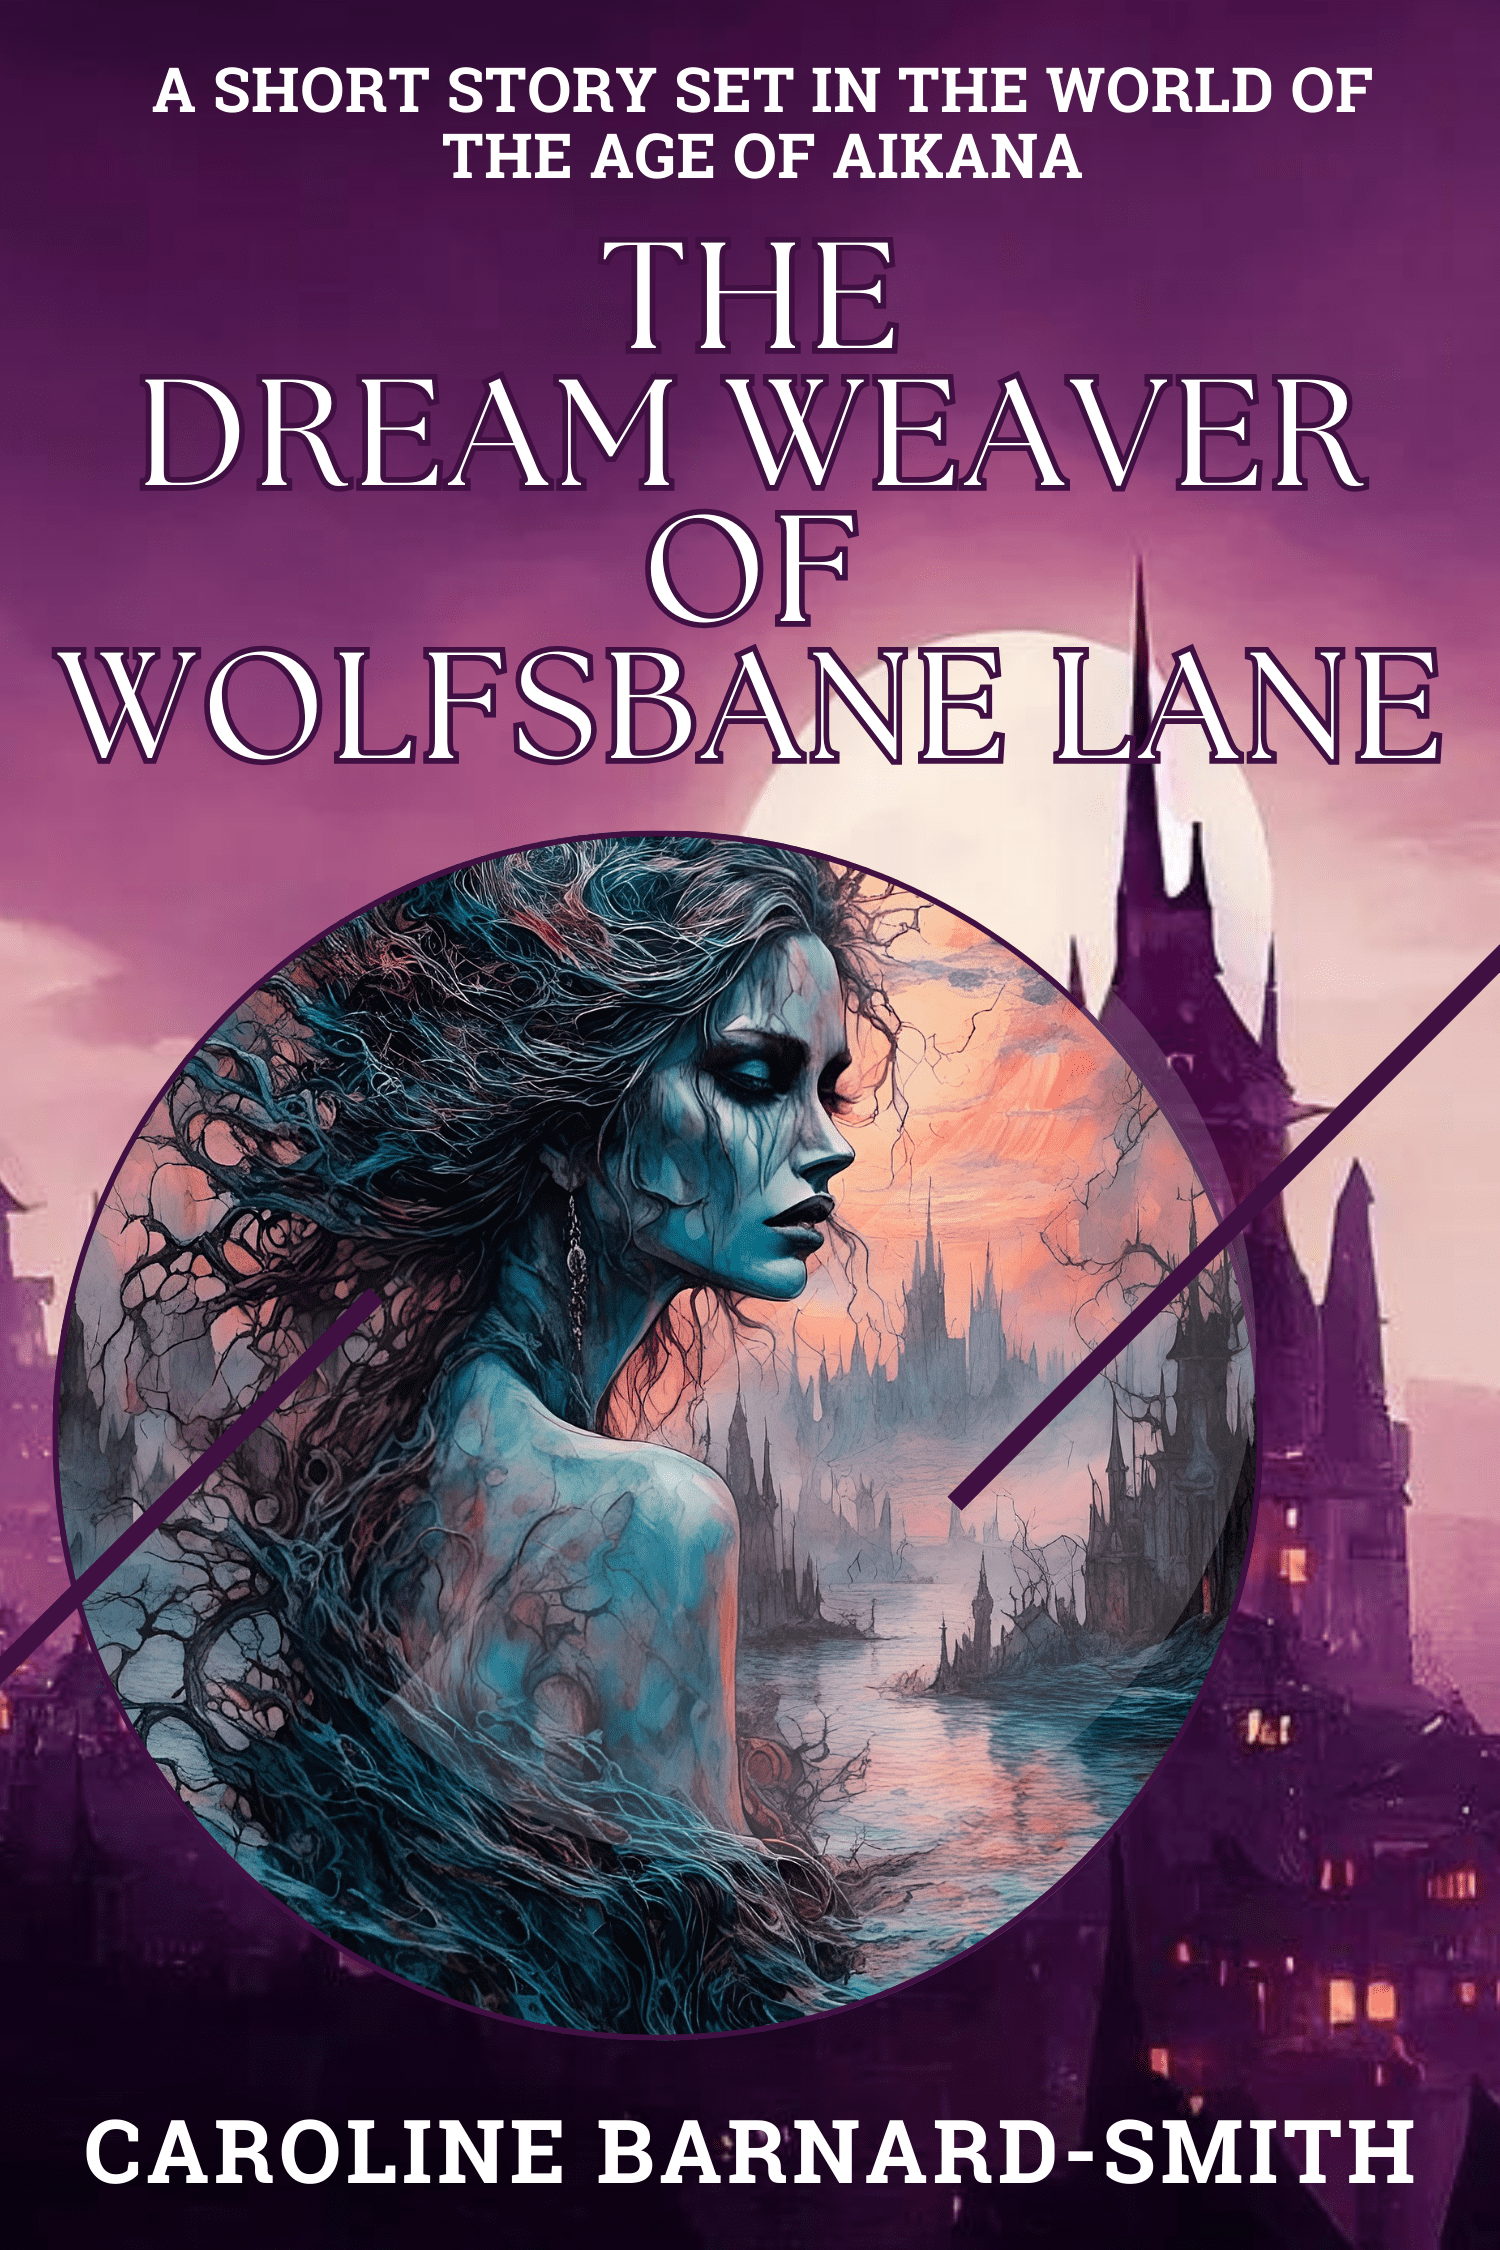 Read The Dream Weaver of Wolfsbane Lane FREE when you sign up for my newsletter!